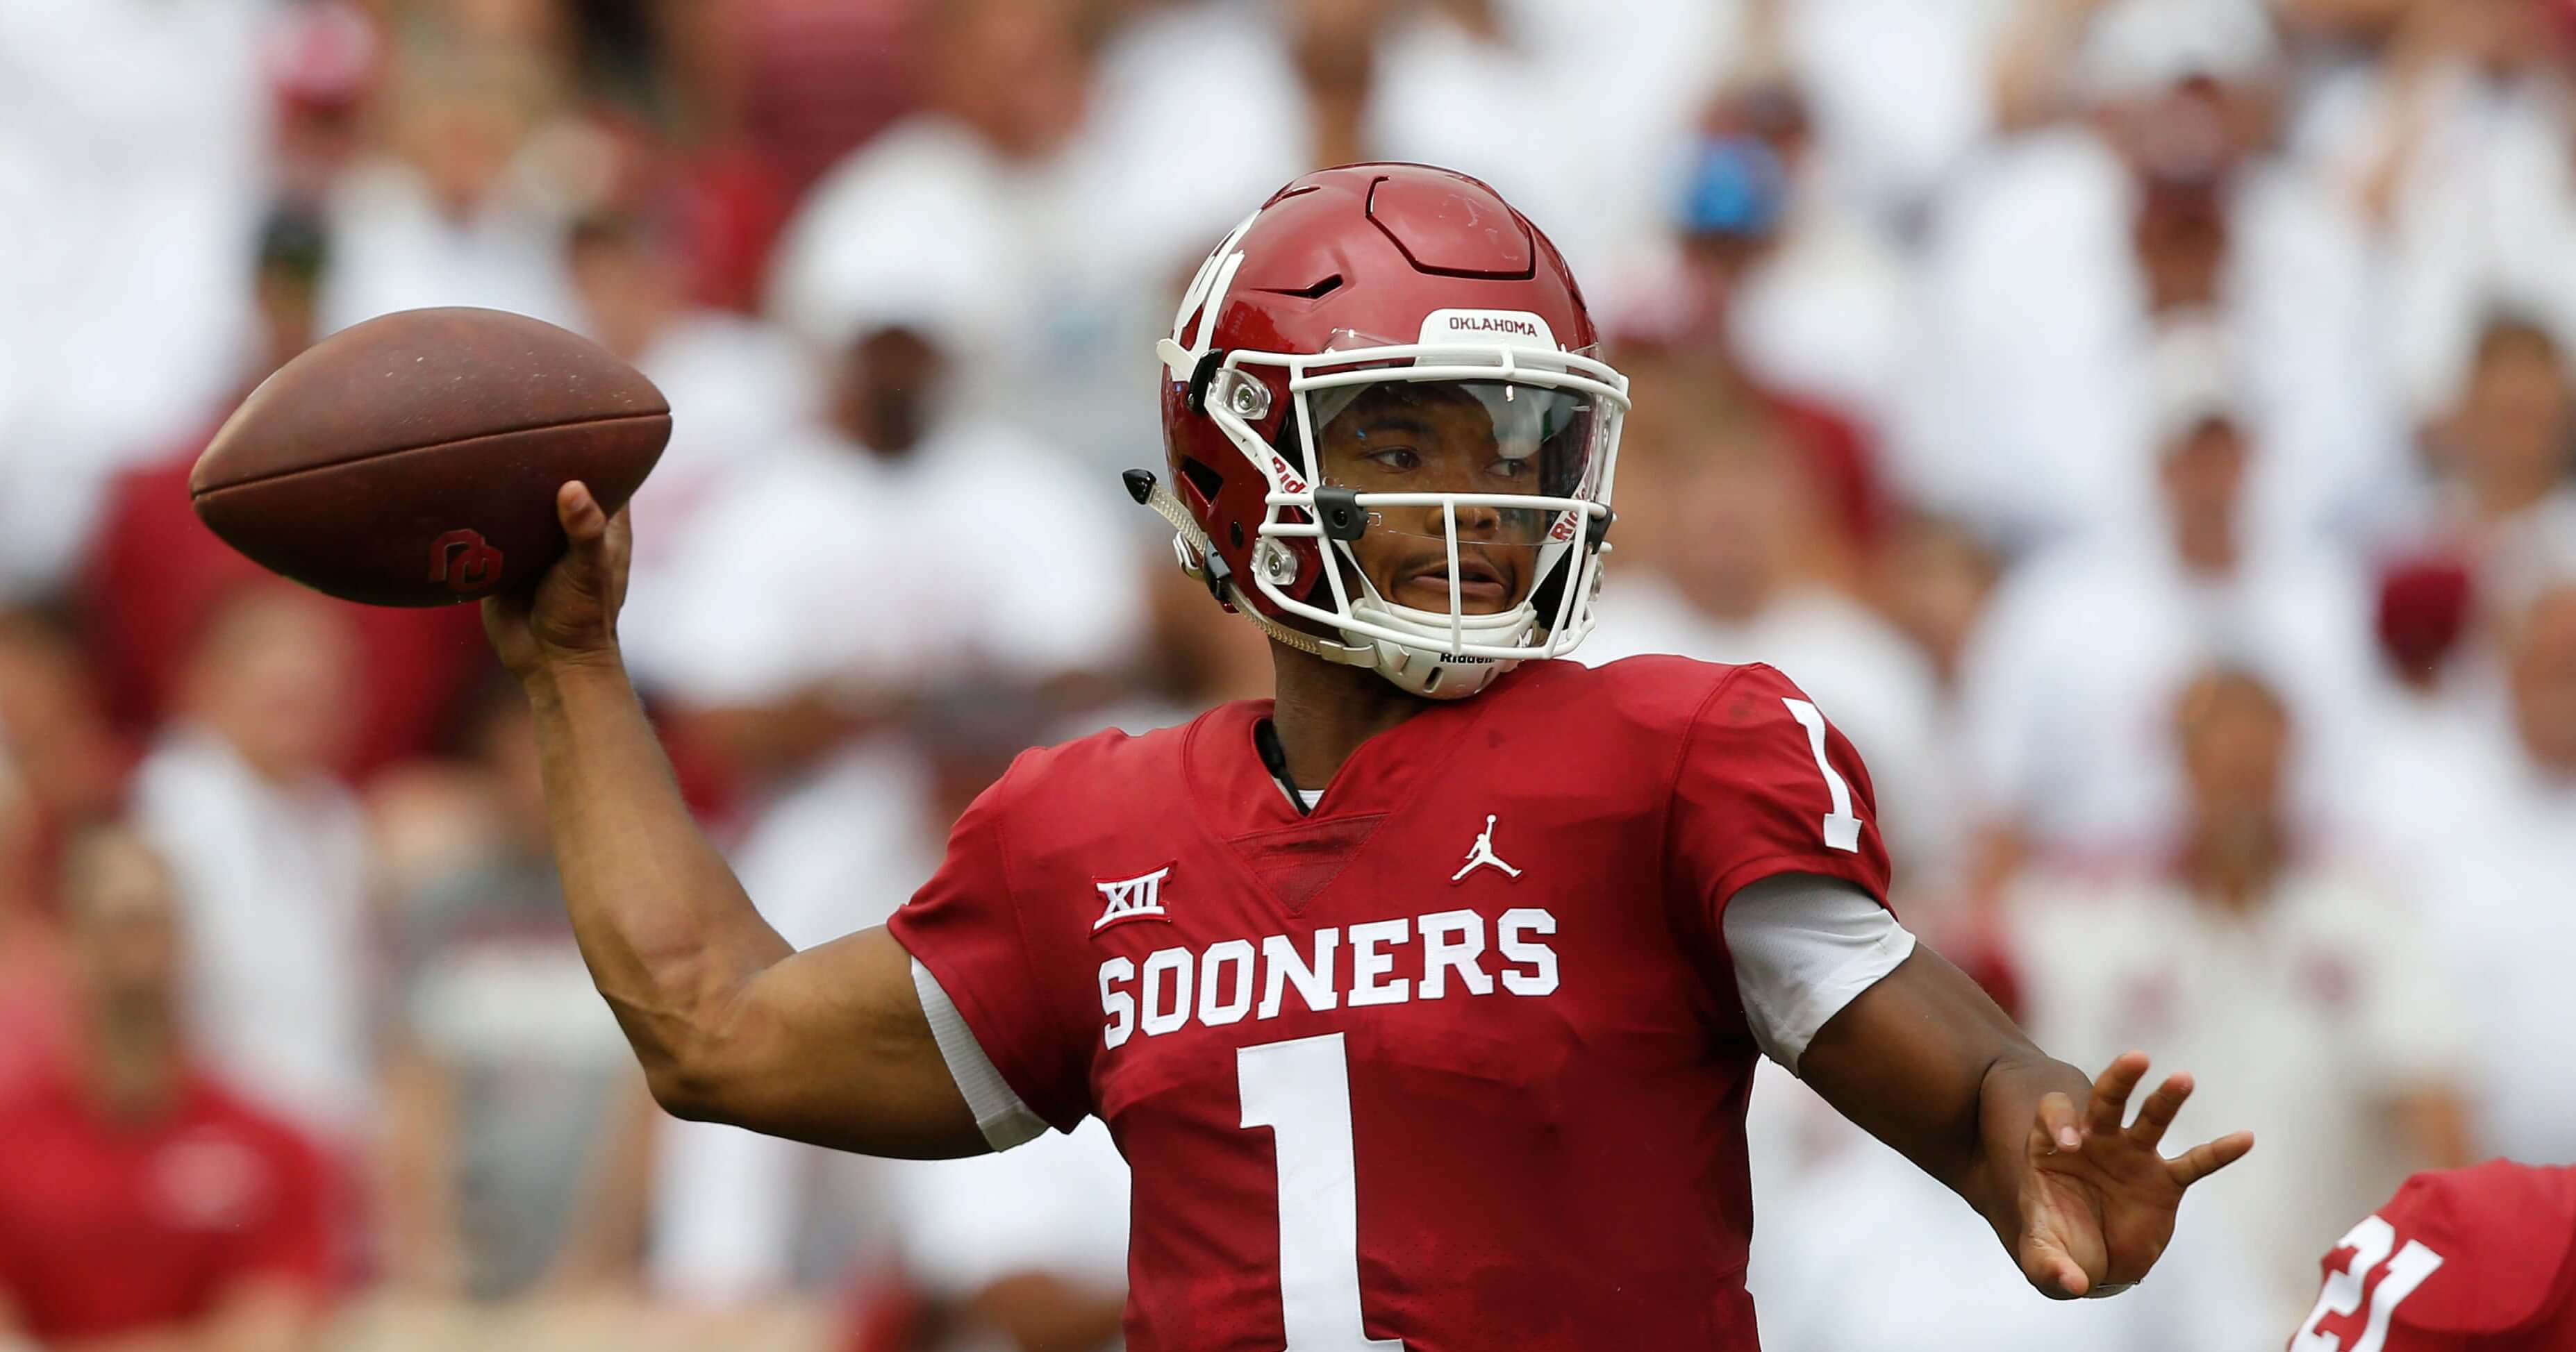 Oklahoma quarterback Kyler Murray throws a pass during the Sooners' game against UCLA in Norman on Saturday.